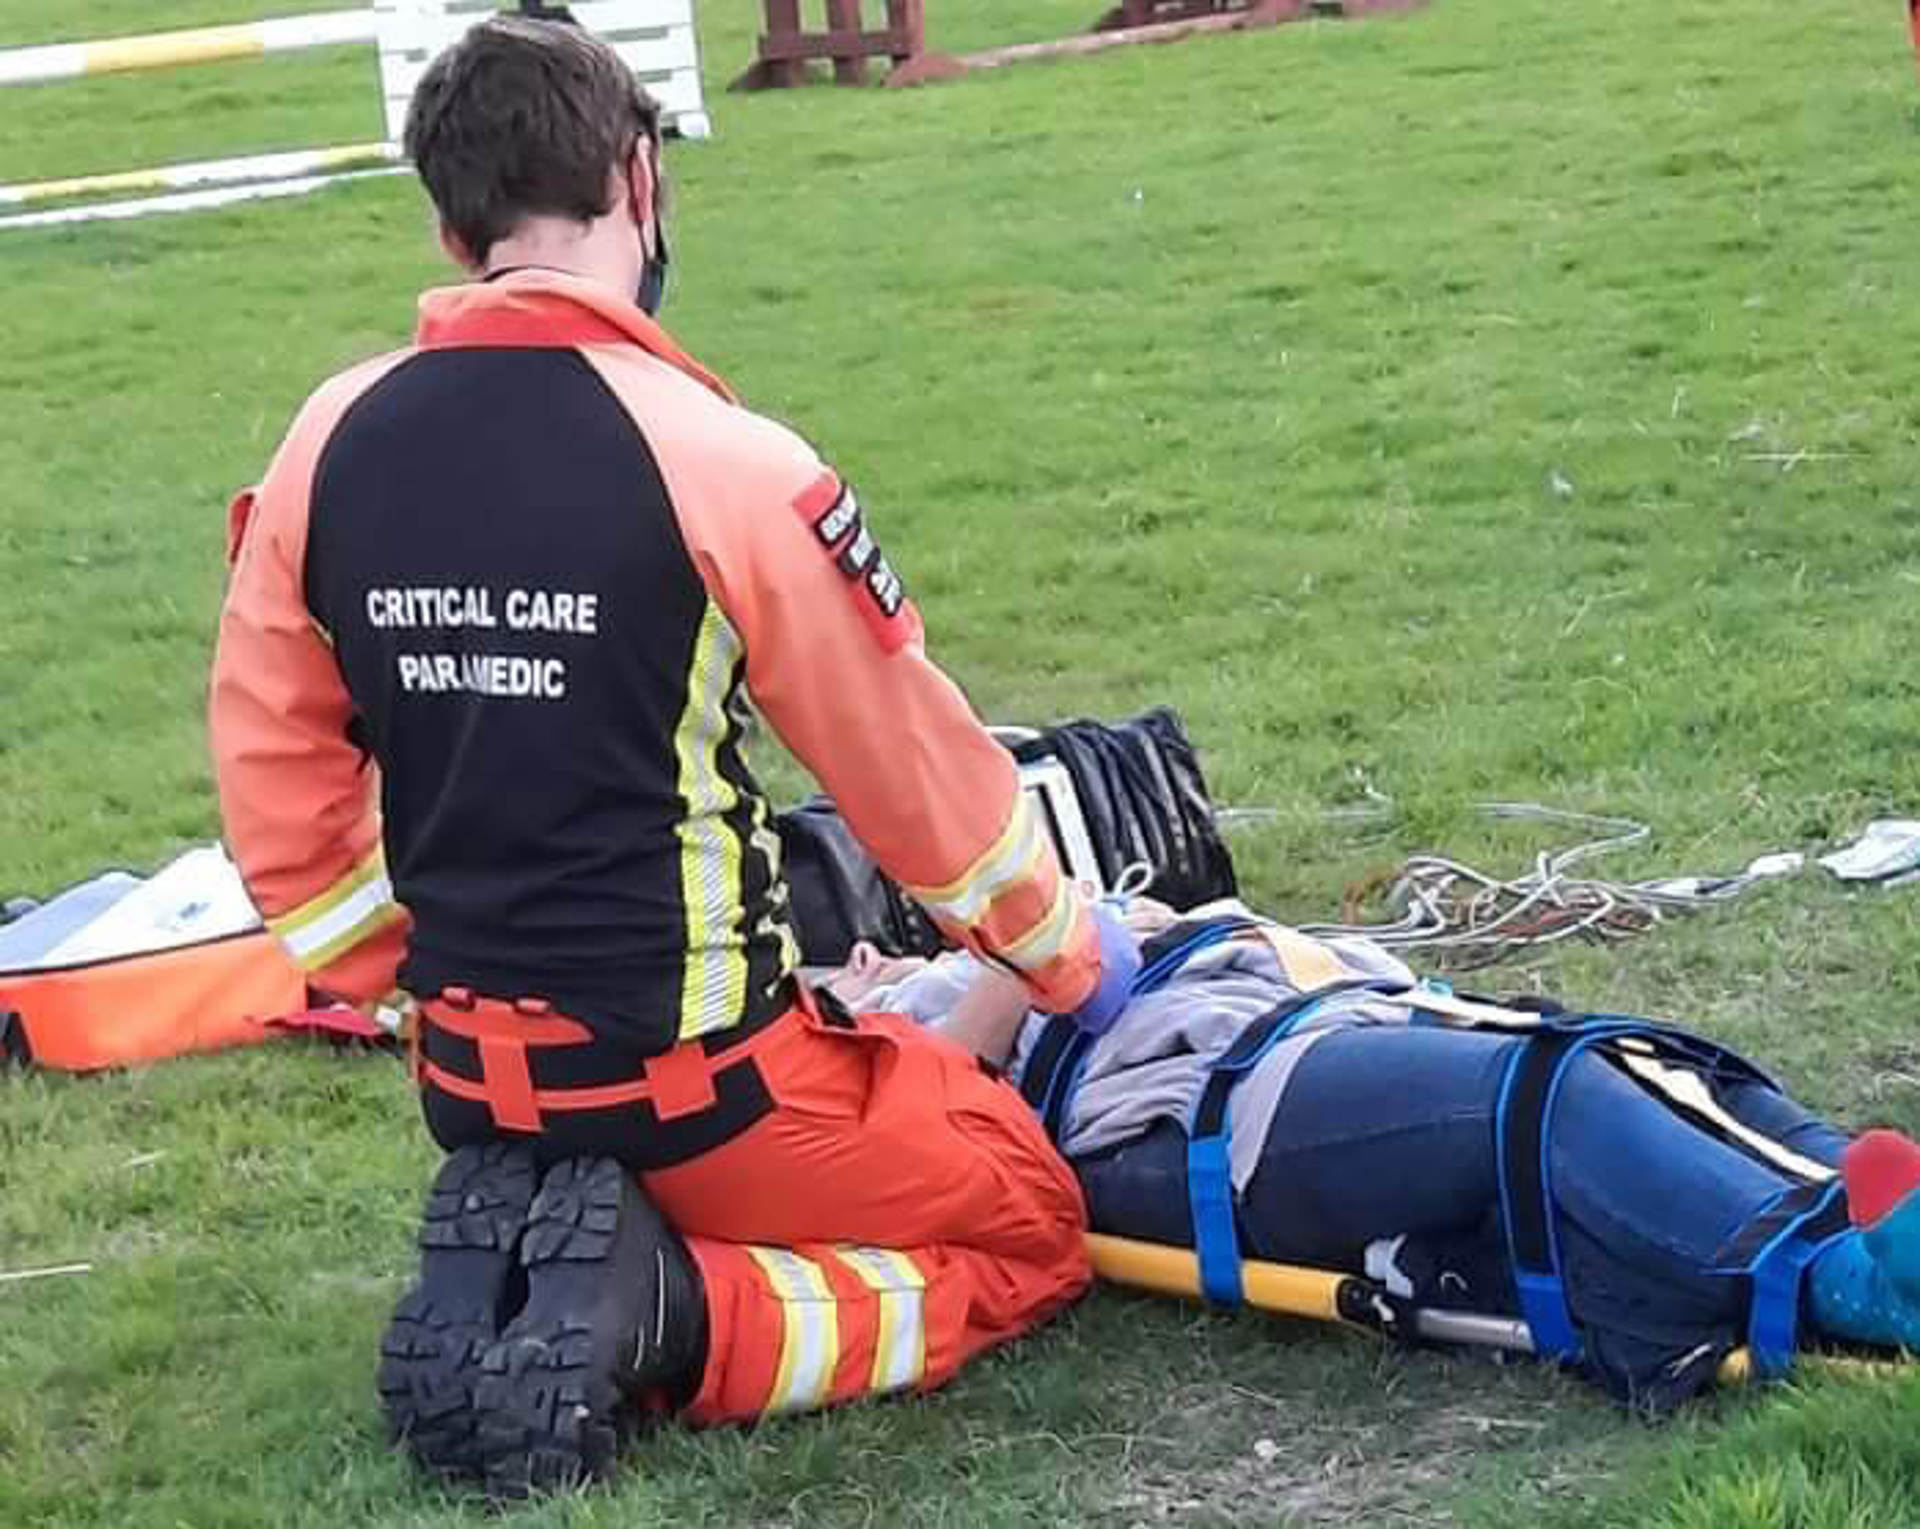 A patient laying on a stretcher with a critical care paramedic knelt by their side